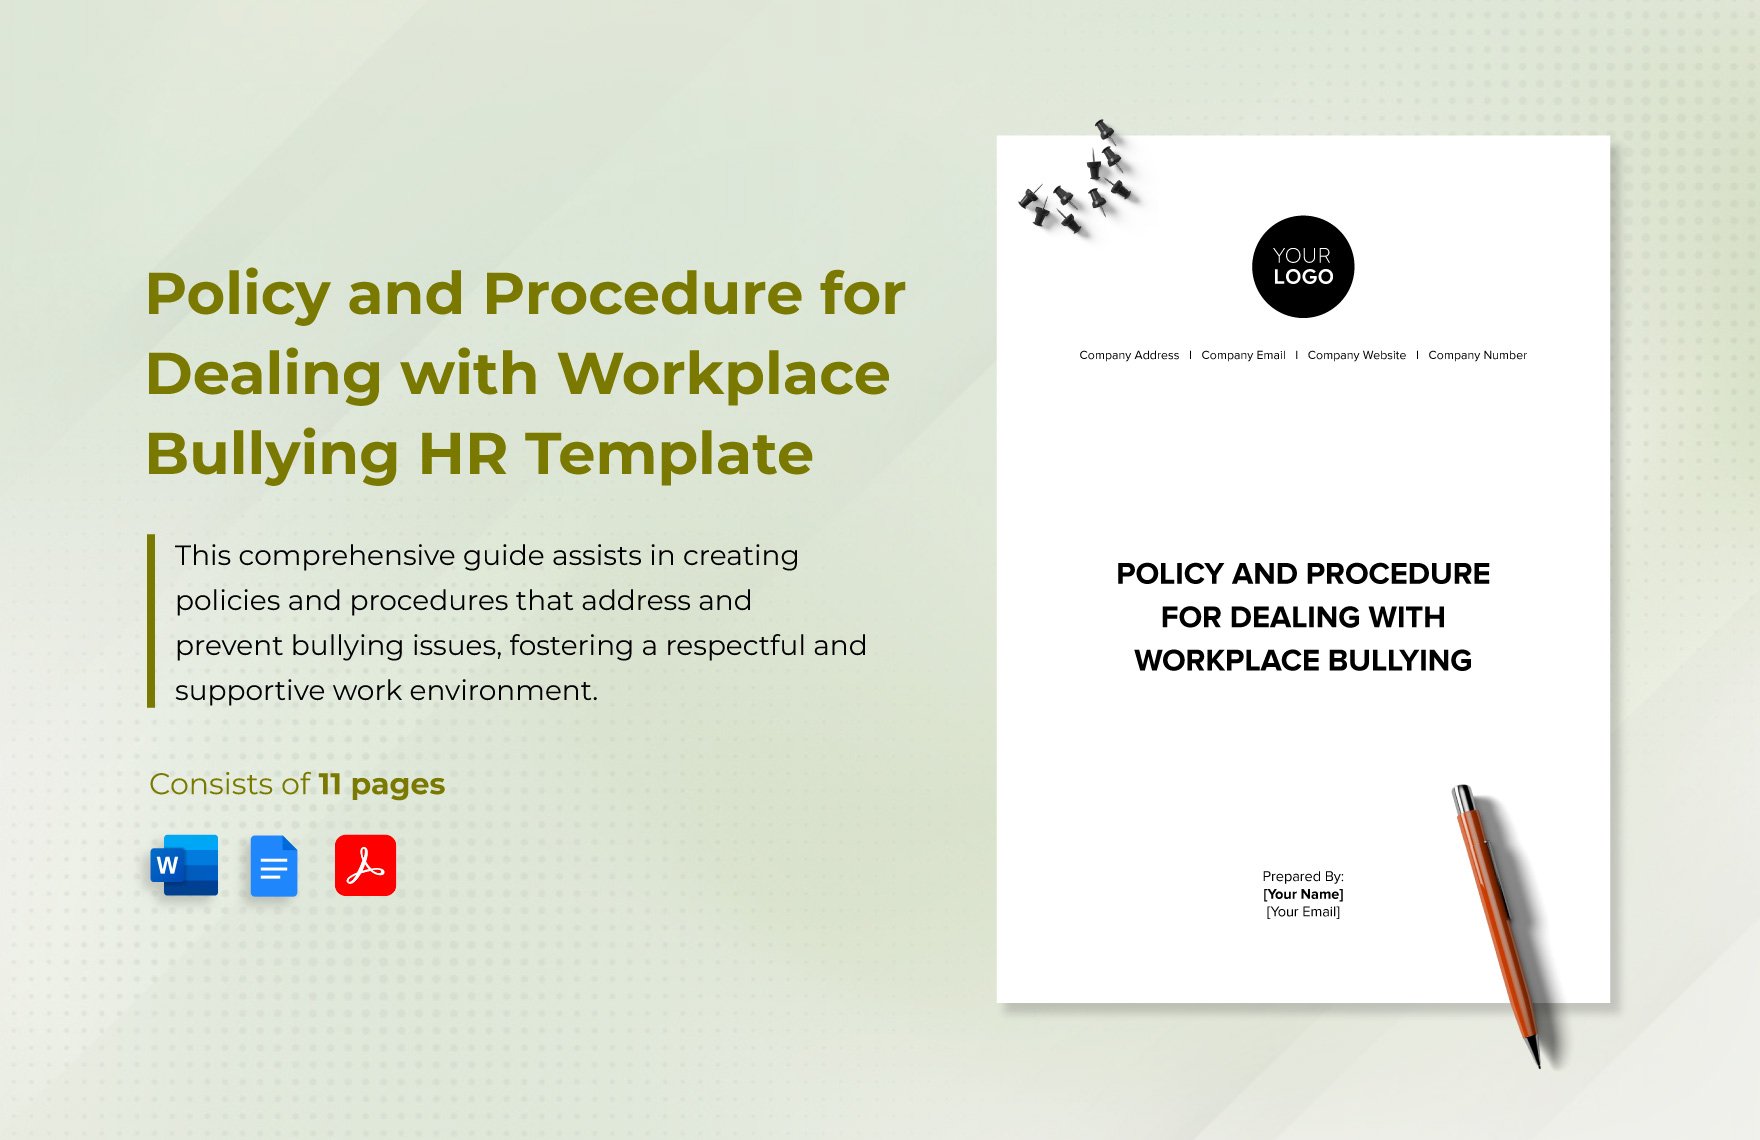 Policy and Procedure for Dealing with Workplace Bullying HR Template